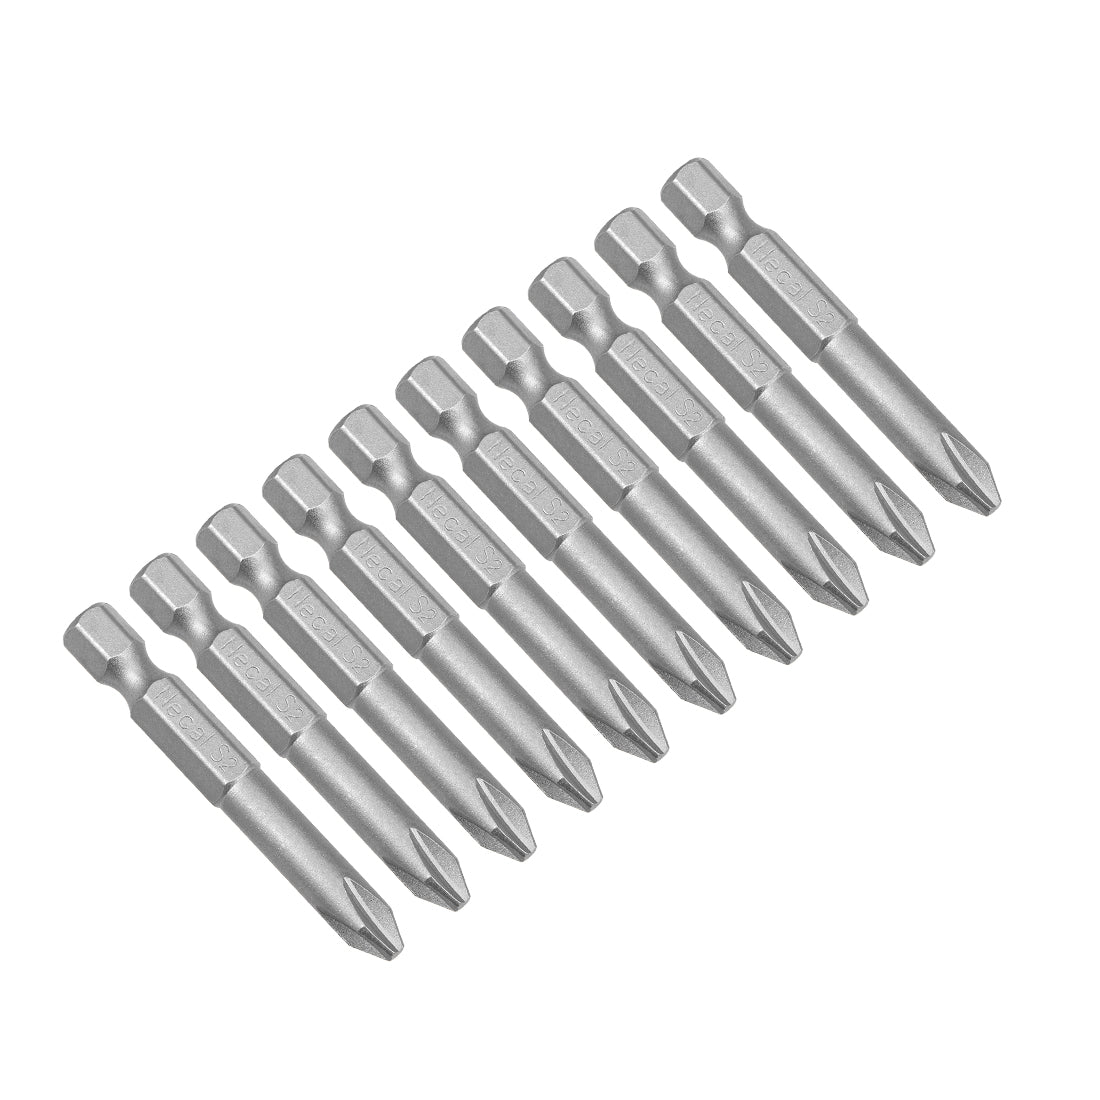 uxcell Uxcell 10Pcs 1/4-Inch Hex Shank 50mm Length Phillips 6PH2 Magnetic Screw Driver S2 Screwdriver Bits